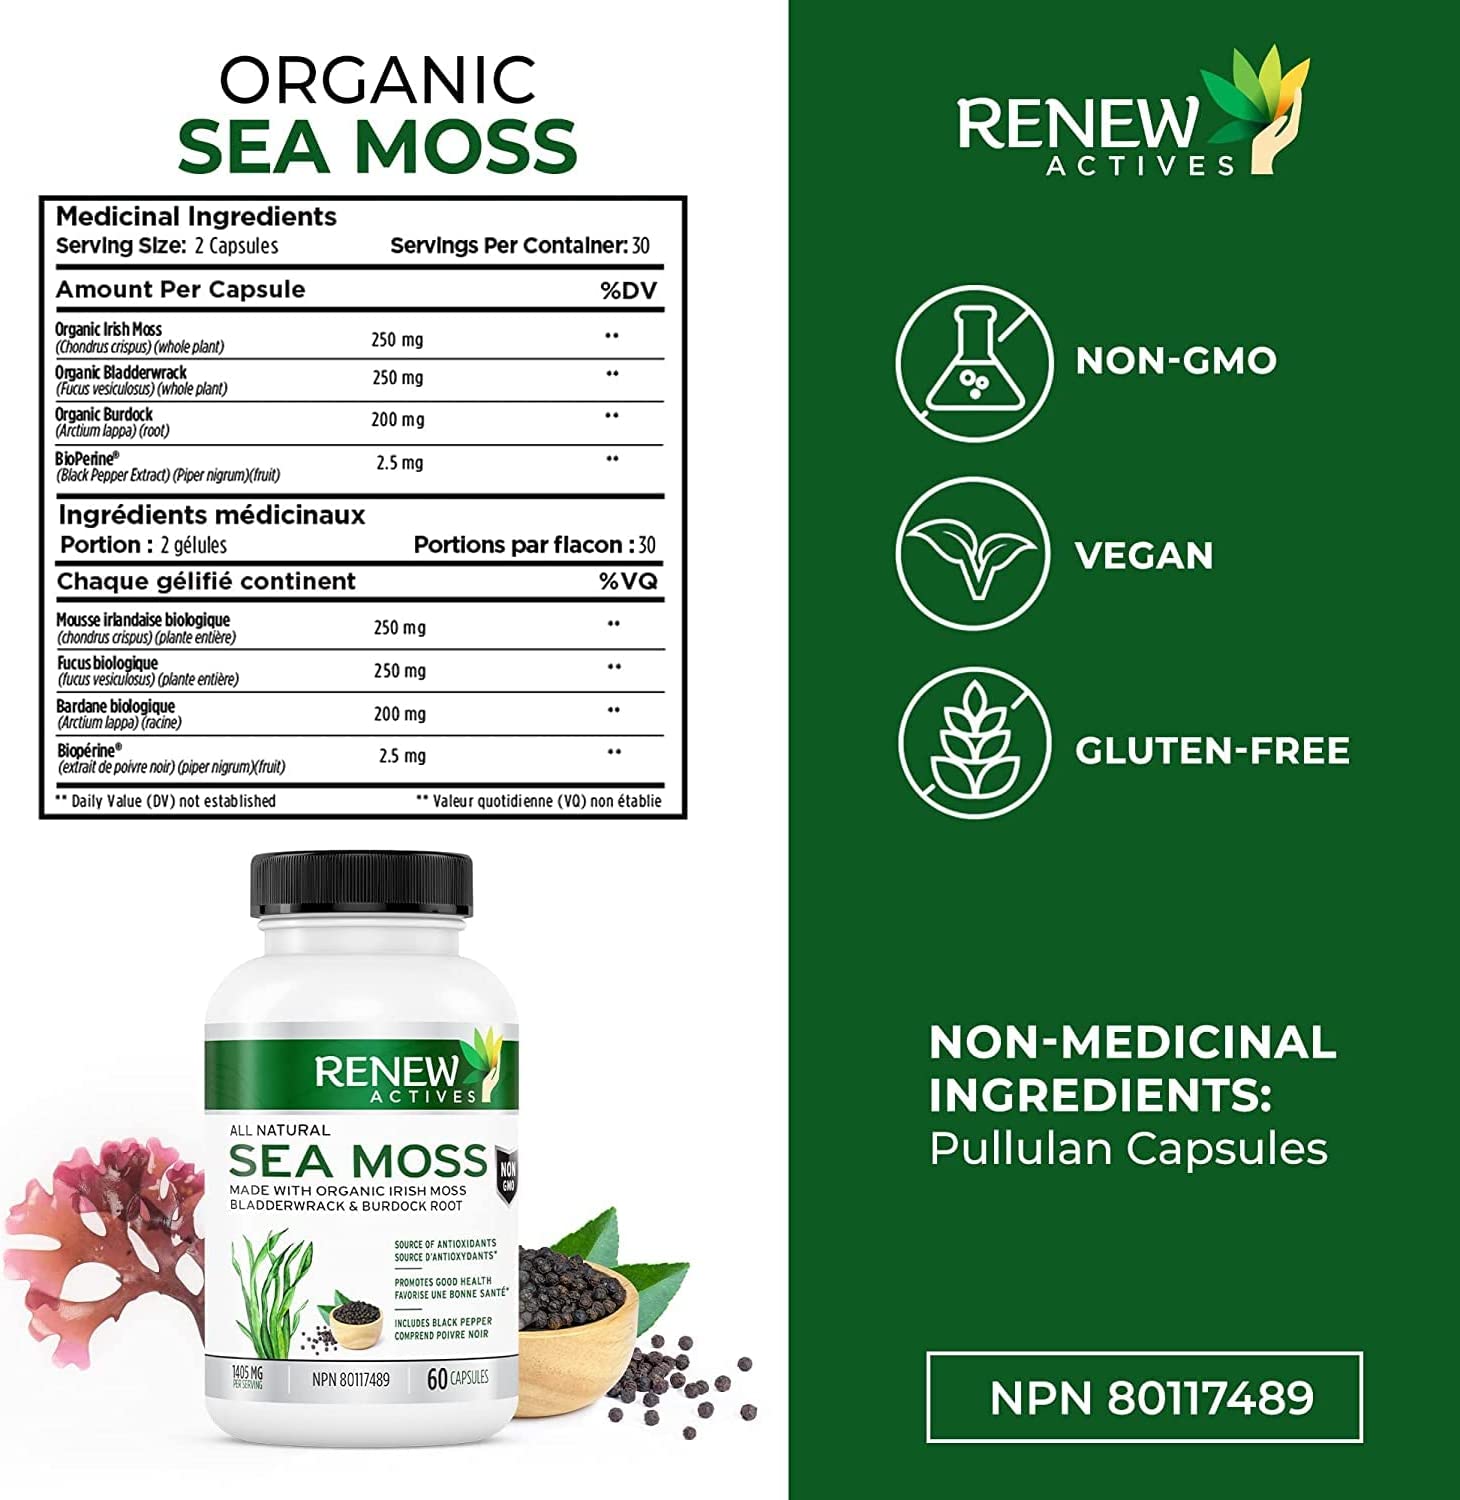 Renew Actives Sea Moss Capsules with BioPerine® for Max Absorption